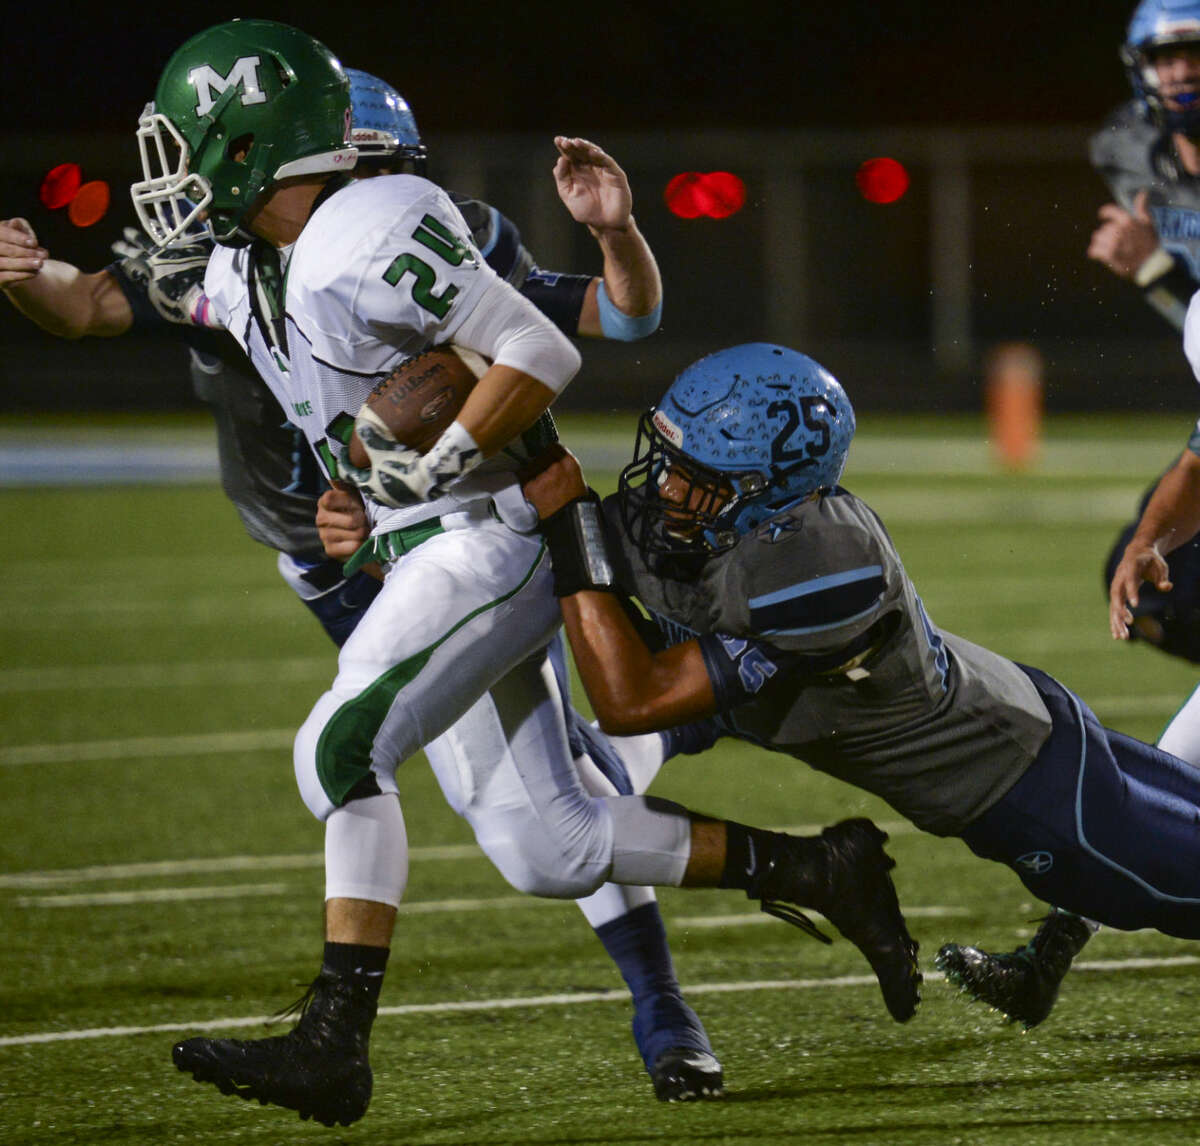 HS FOOTBALL: Monahans defense stalls Rangers' offense in victory